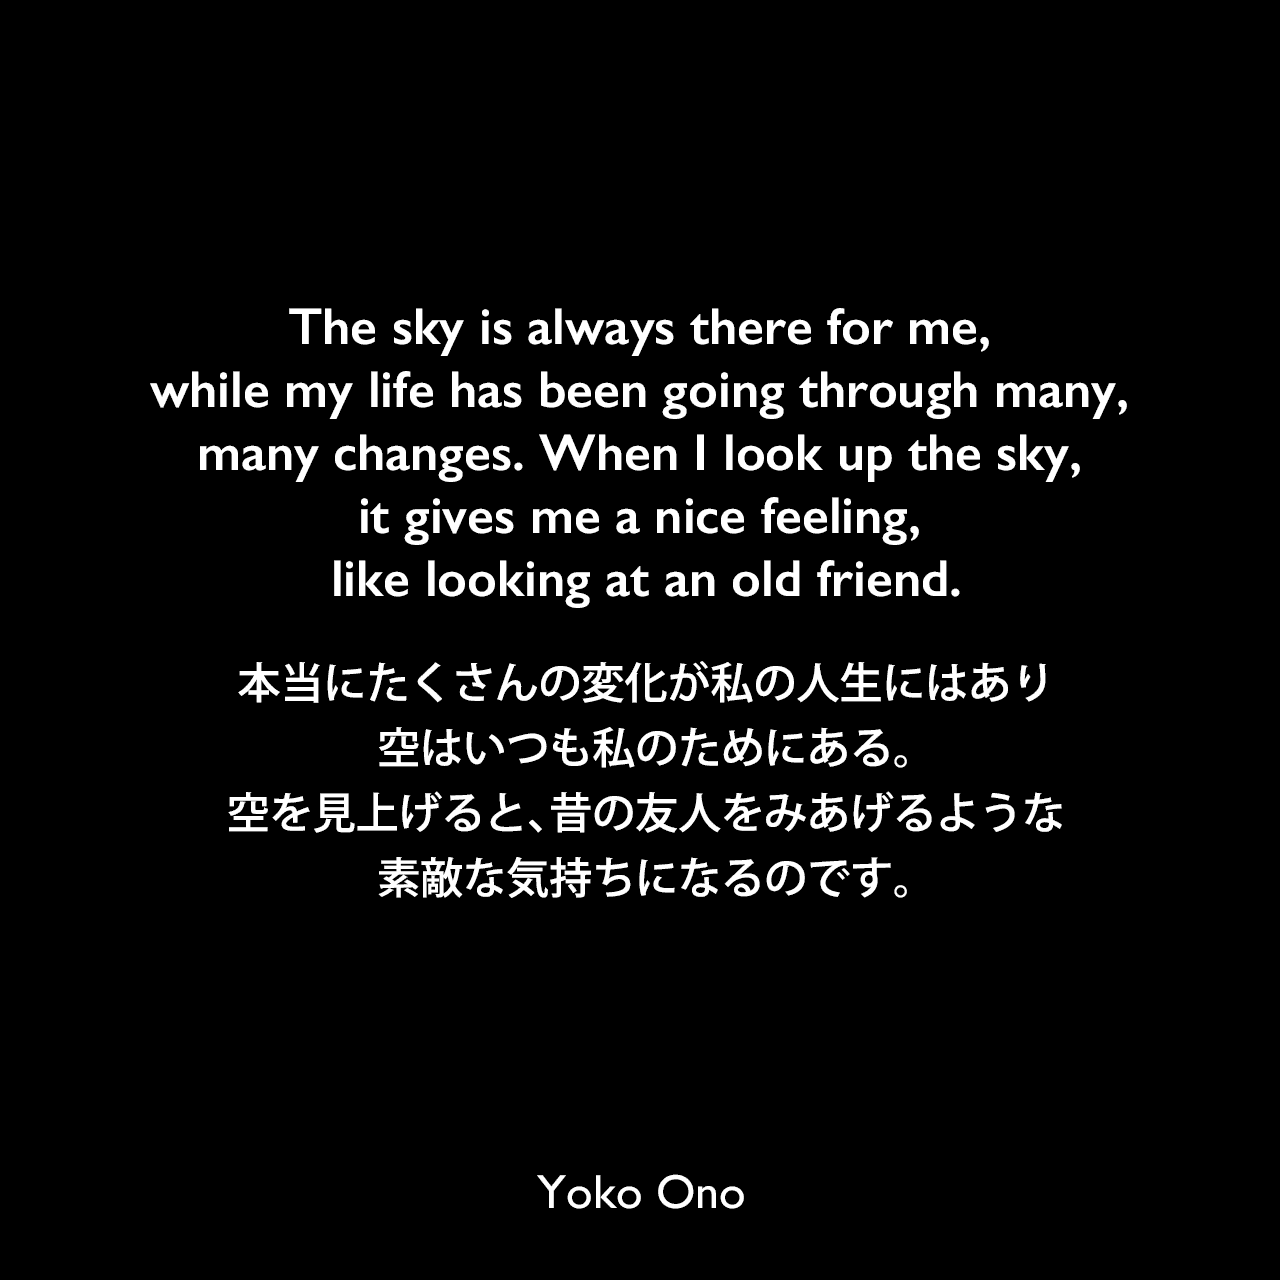 The sky is always there for me, while my life has been going through many, many changes. When I look up the sky, it gives me a nice feeling, like looking at an old friend.本当にたくさんの変化が私の人生にはあり、空はいつも私のためにある。空を見上げると、昔の友人をみあげるような、素敵な気持ちになるのです。Yoko Ono